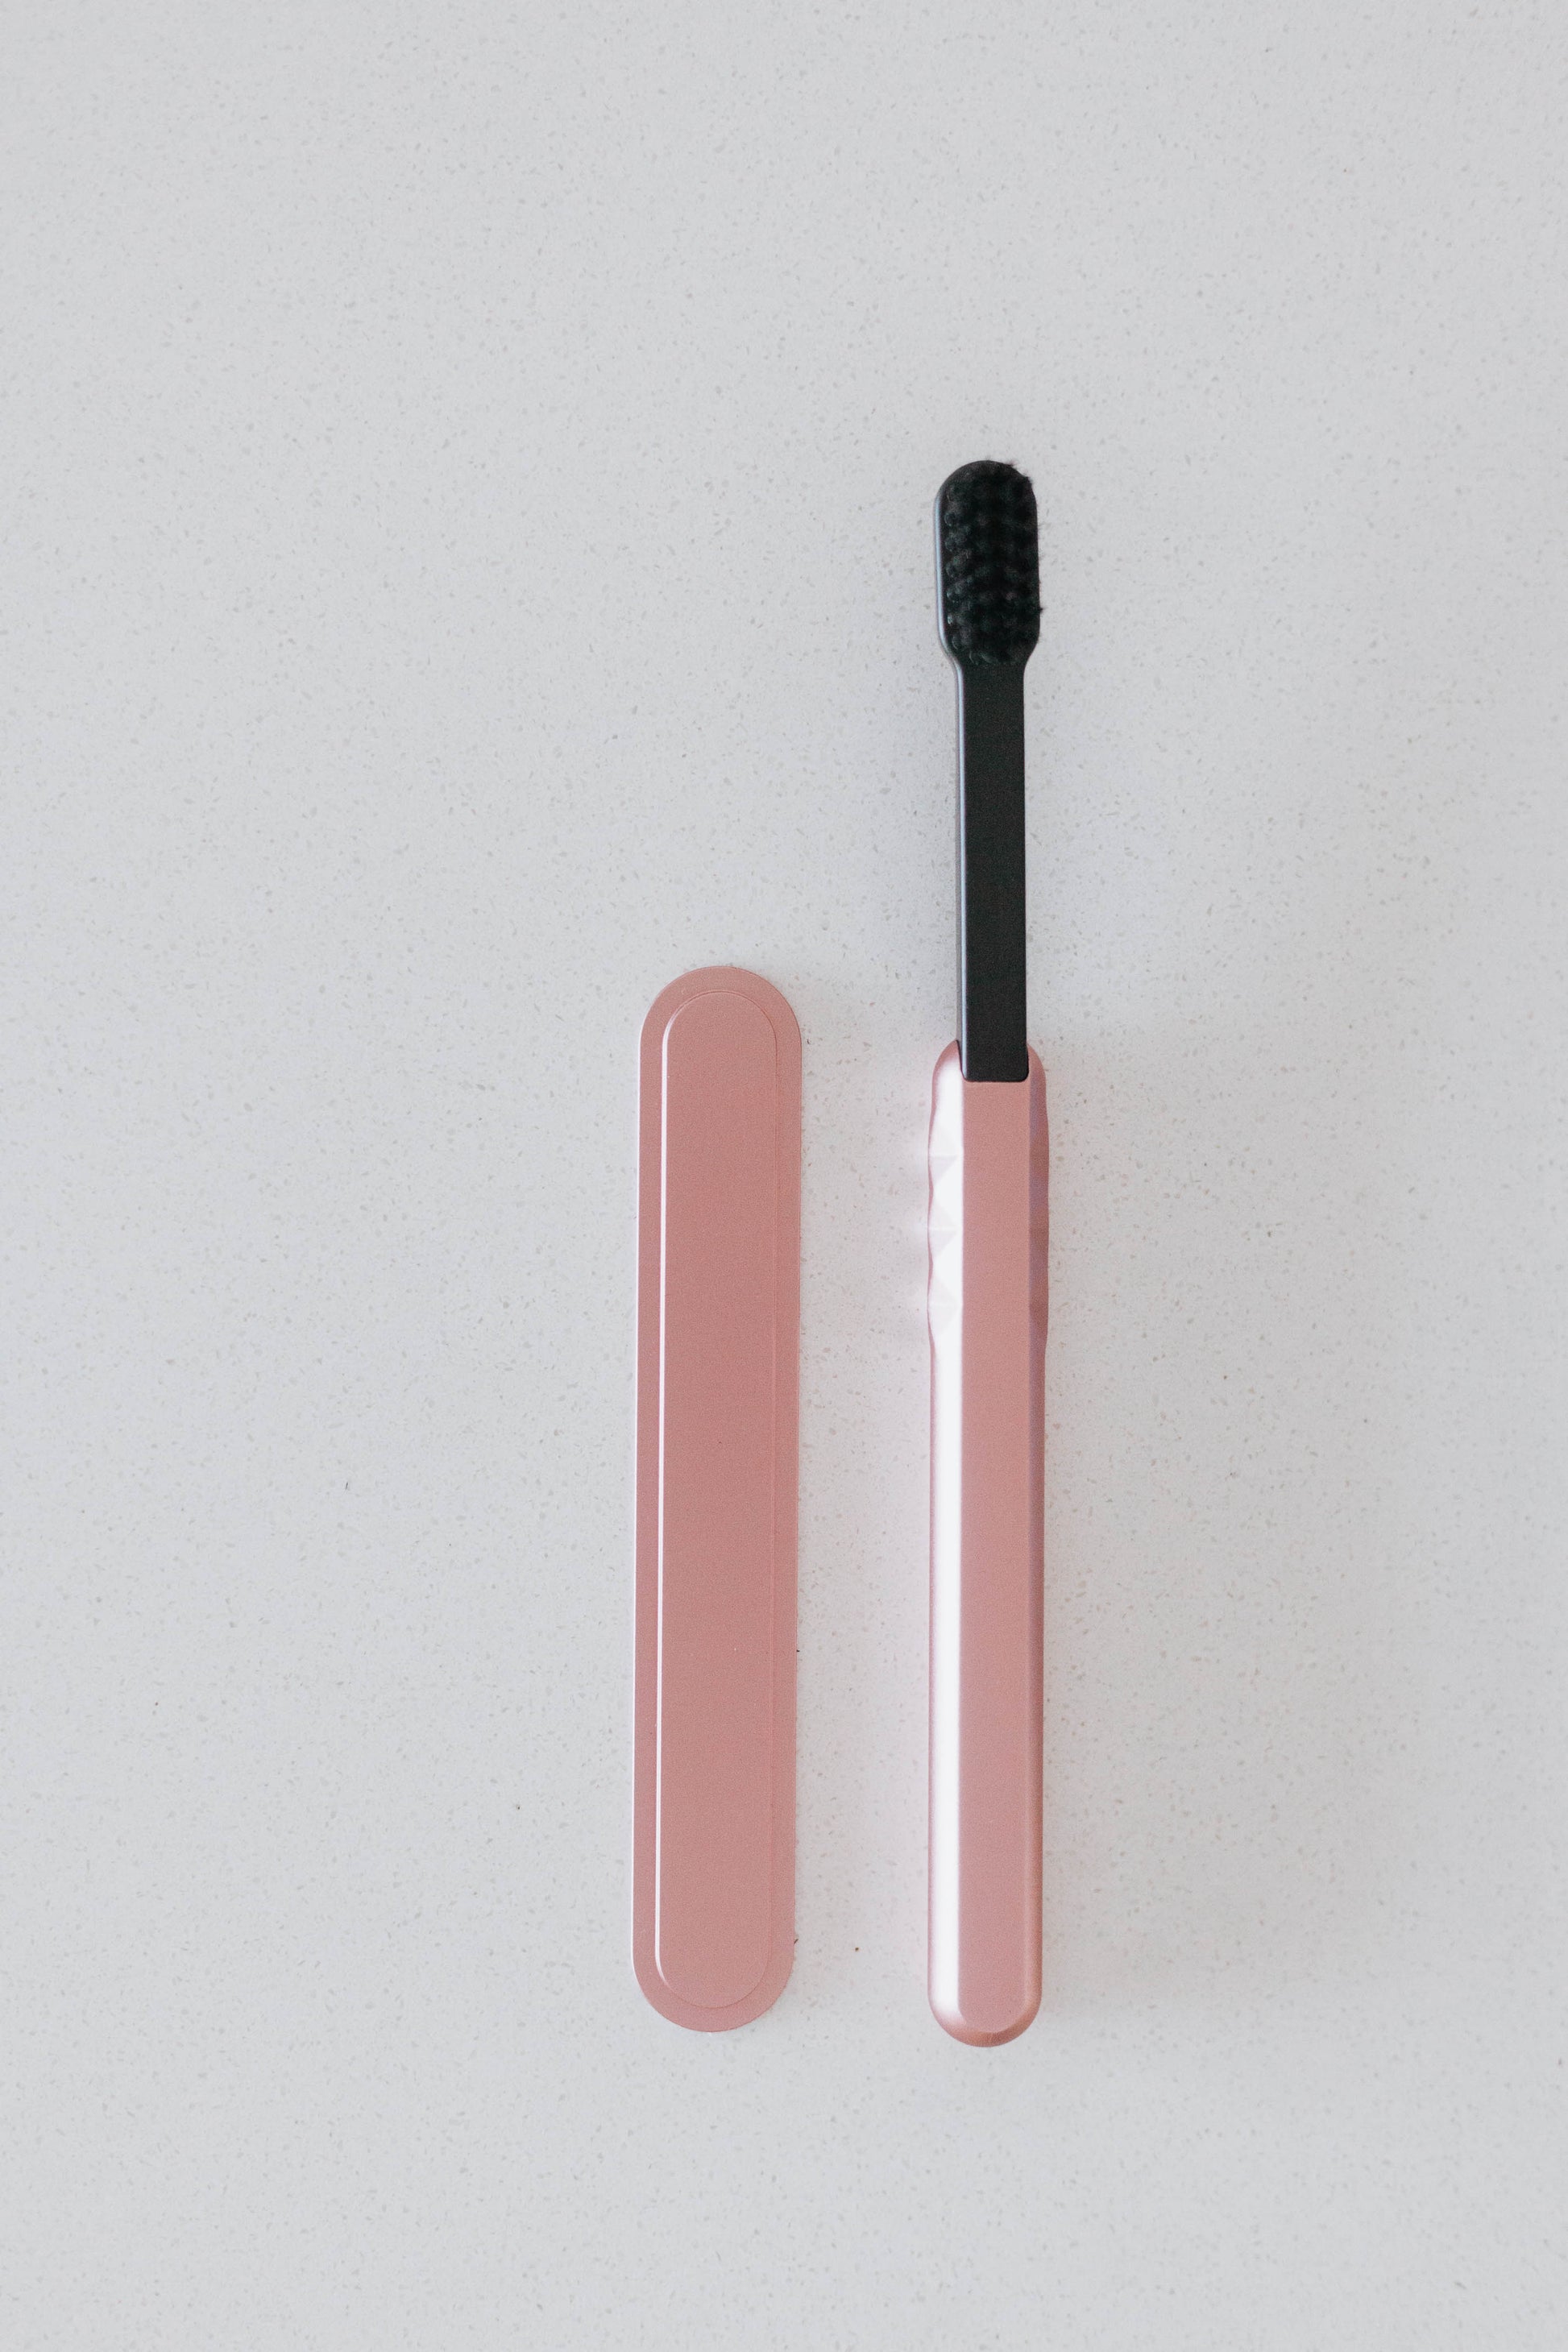 Starter Kit Aluminum Brush Handle and Biodegradable Brush presented with Magnetic Strip, Rose Gold